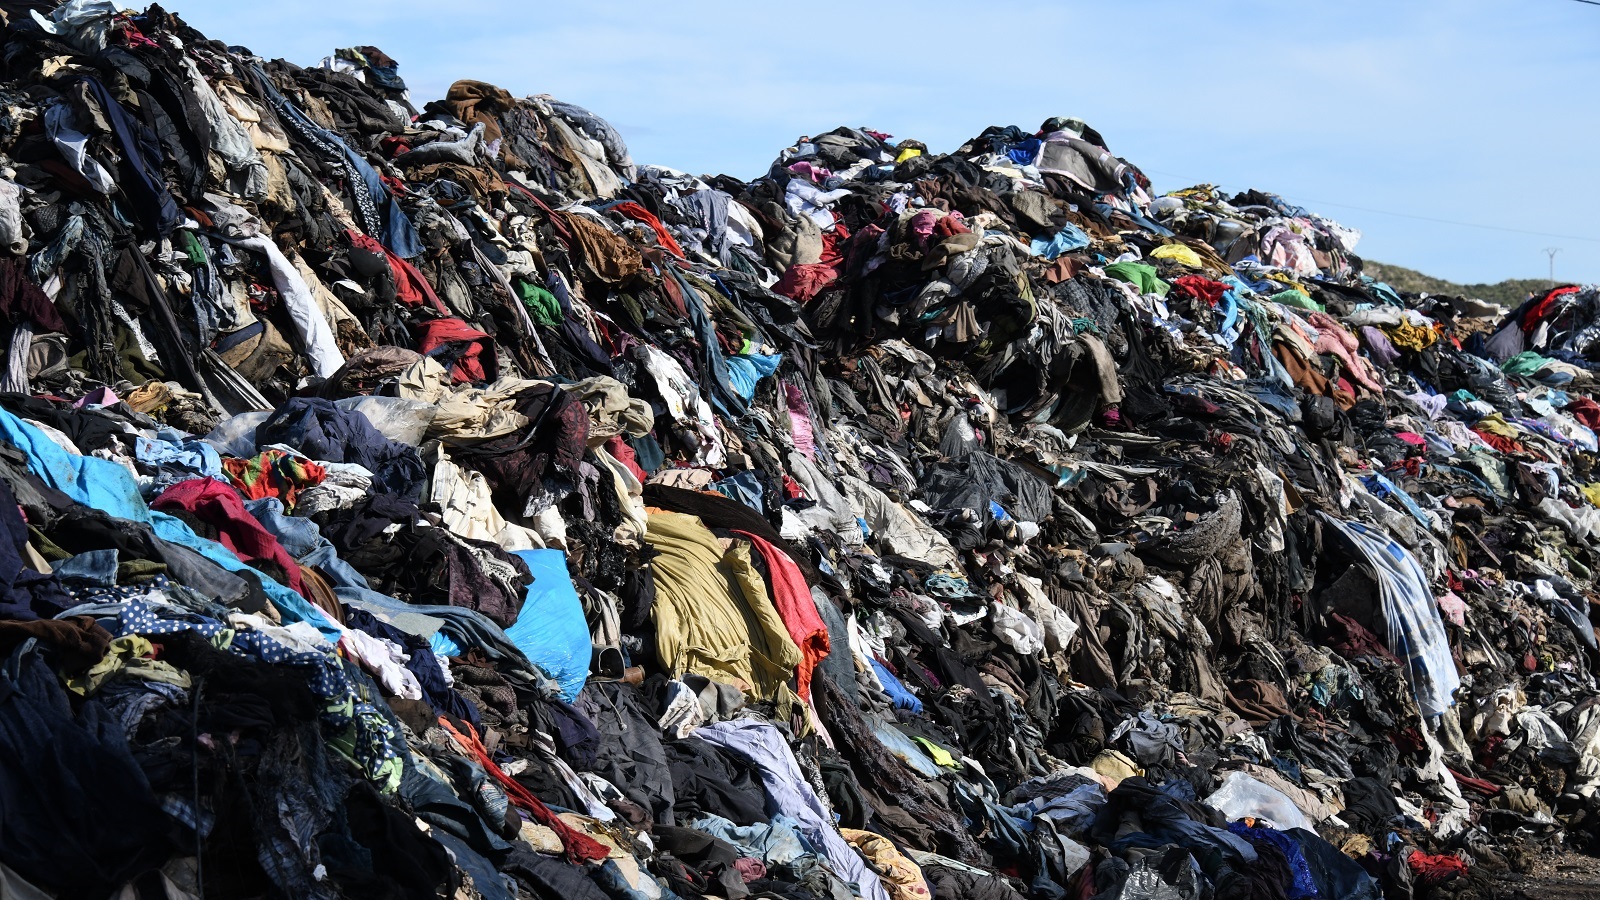 How Does Recycling Your Clothes and Shoes Help Protect the Earth